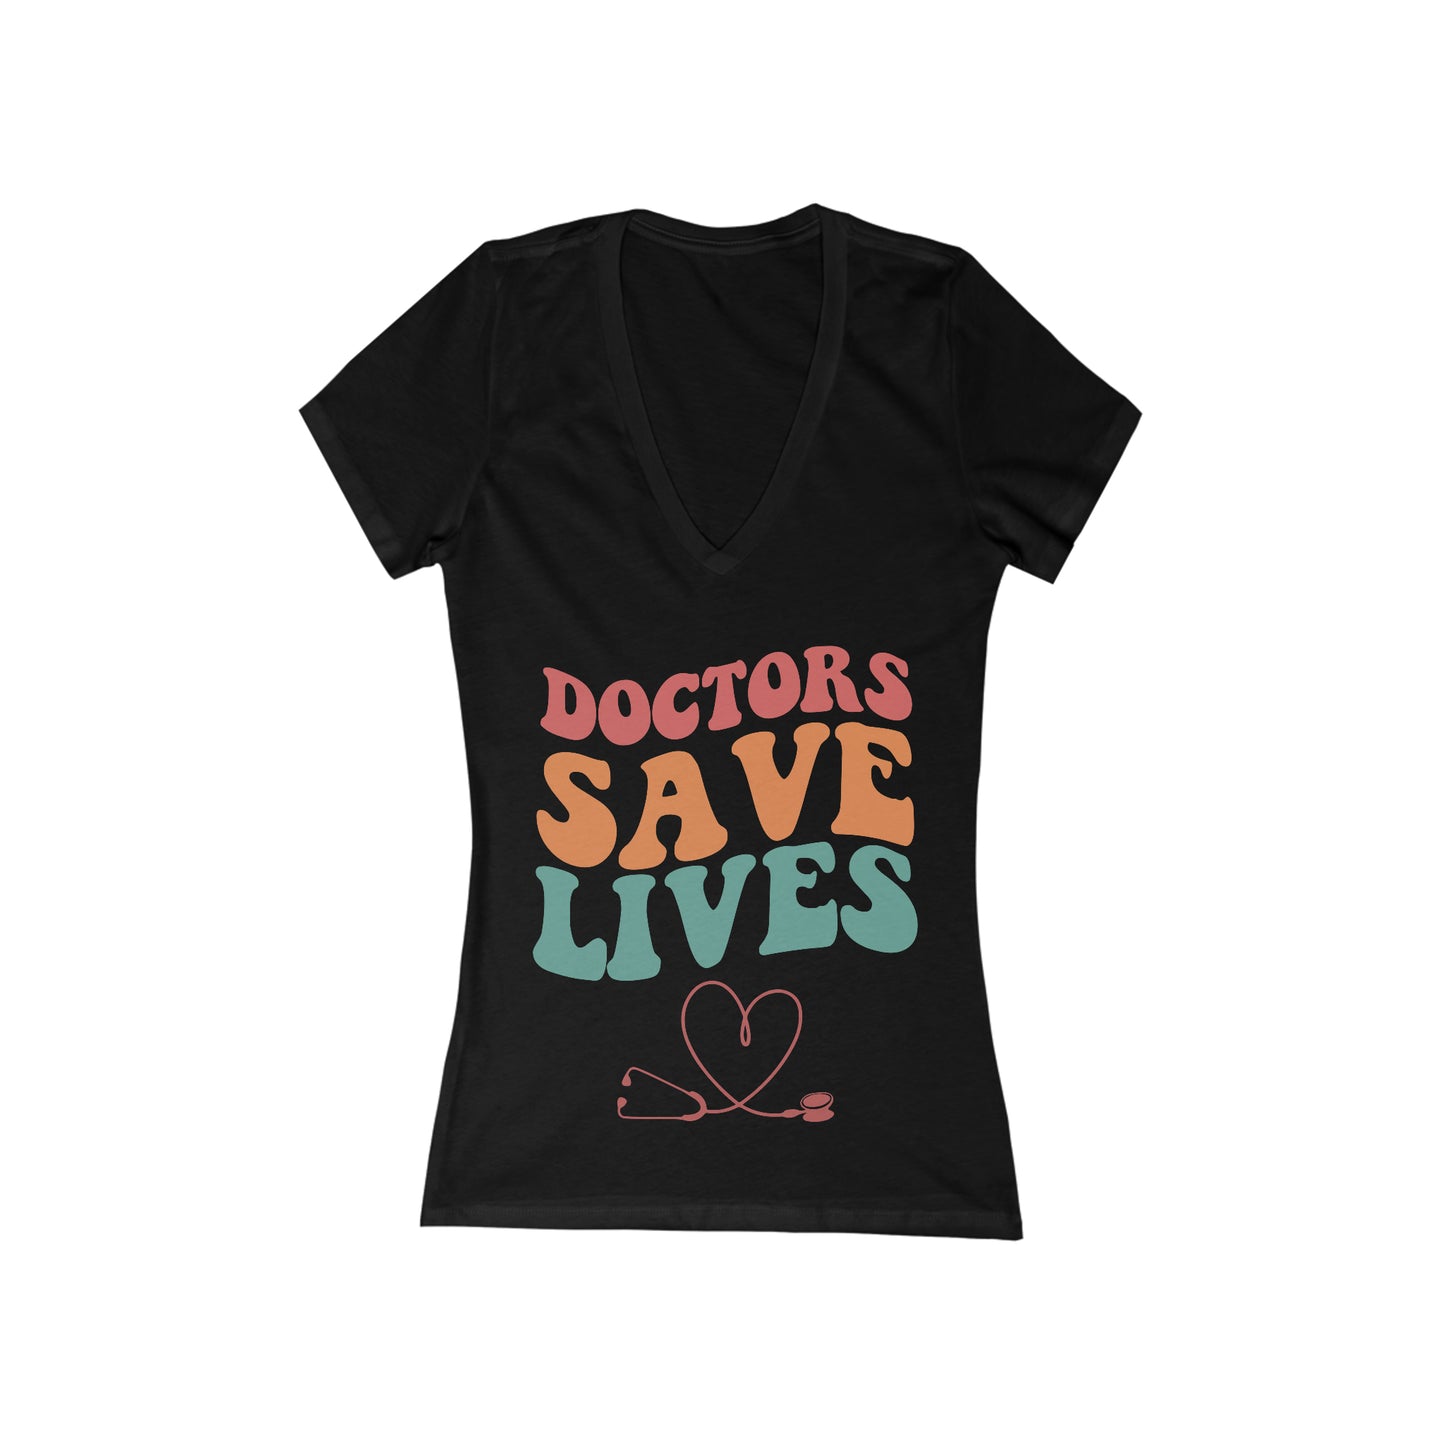 Doctors Save Lives Women's Short Sleeve V-Neck Tee, Doctor shirts, Doctor gift ideas, gift for doctors, women shirt with doctor design